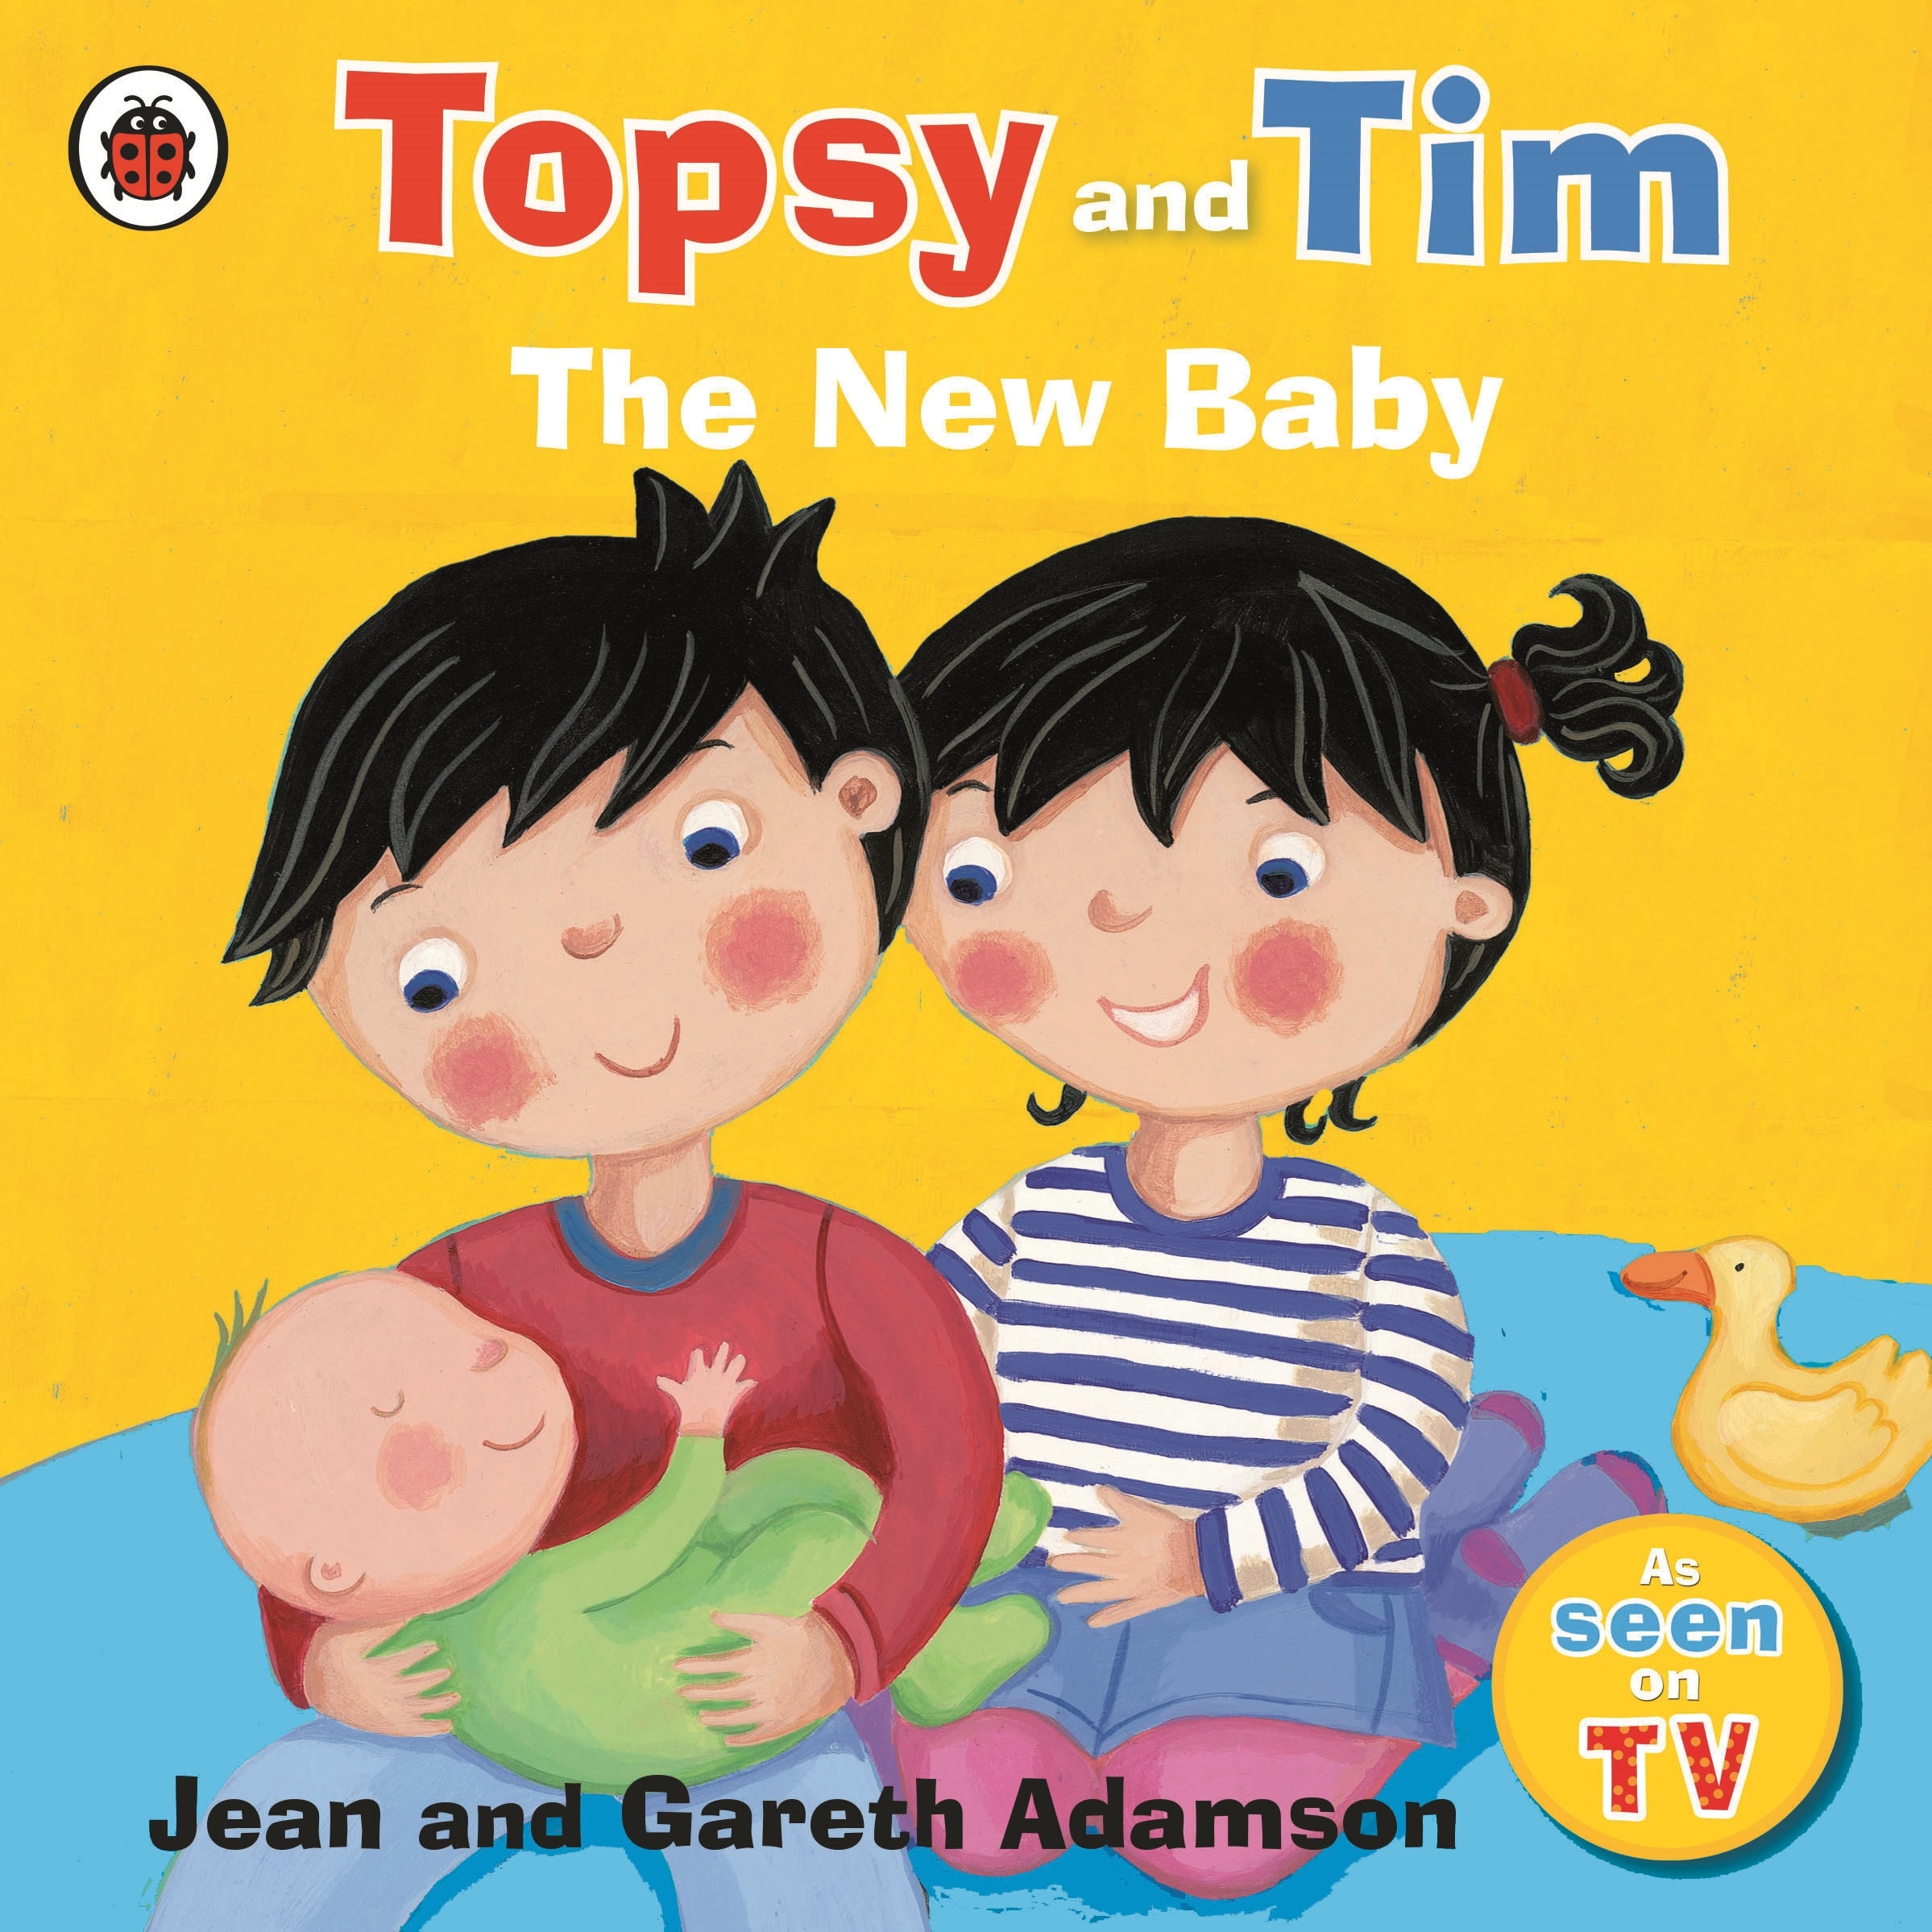 Book “Topsy and Tim: The New Baby” by Jean Adamson — April 2, 2009